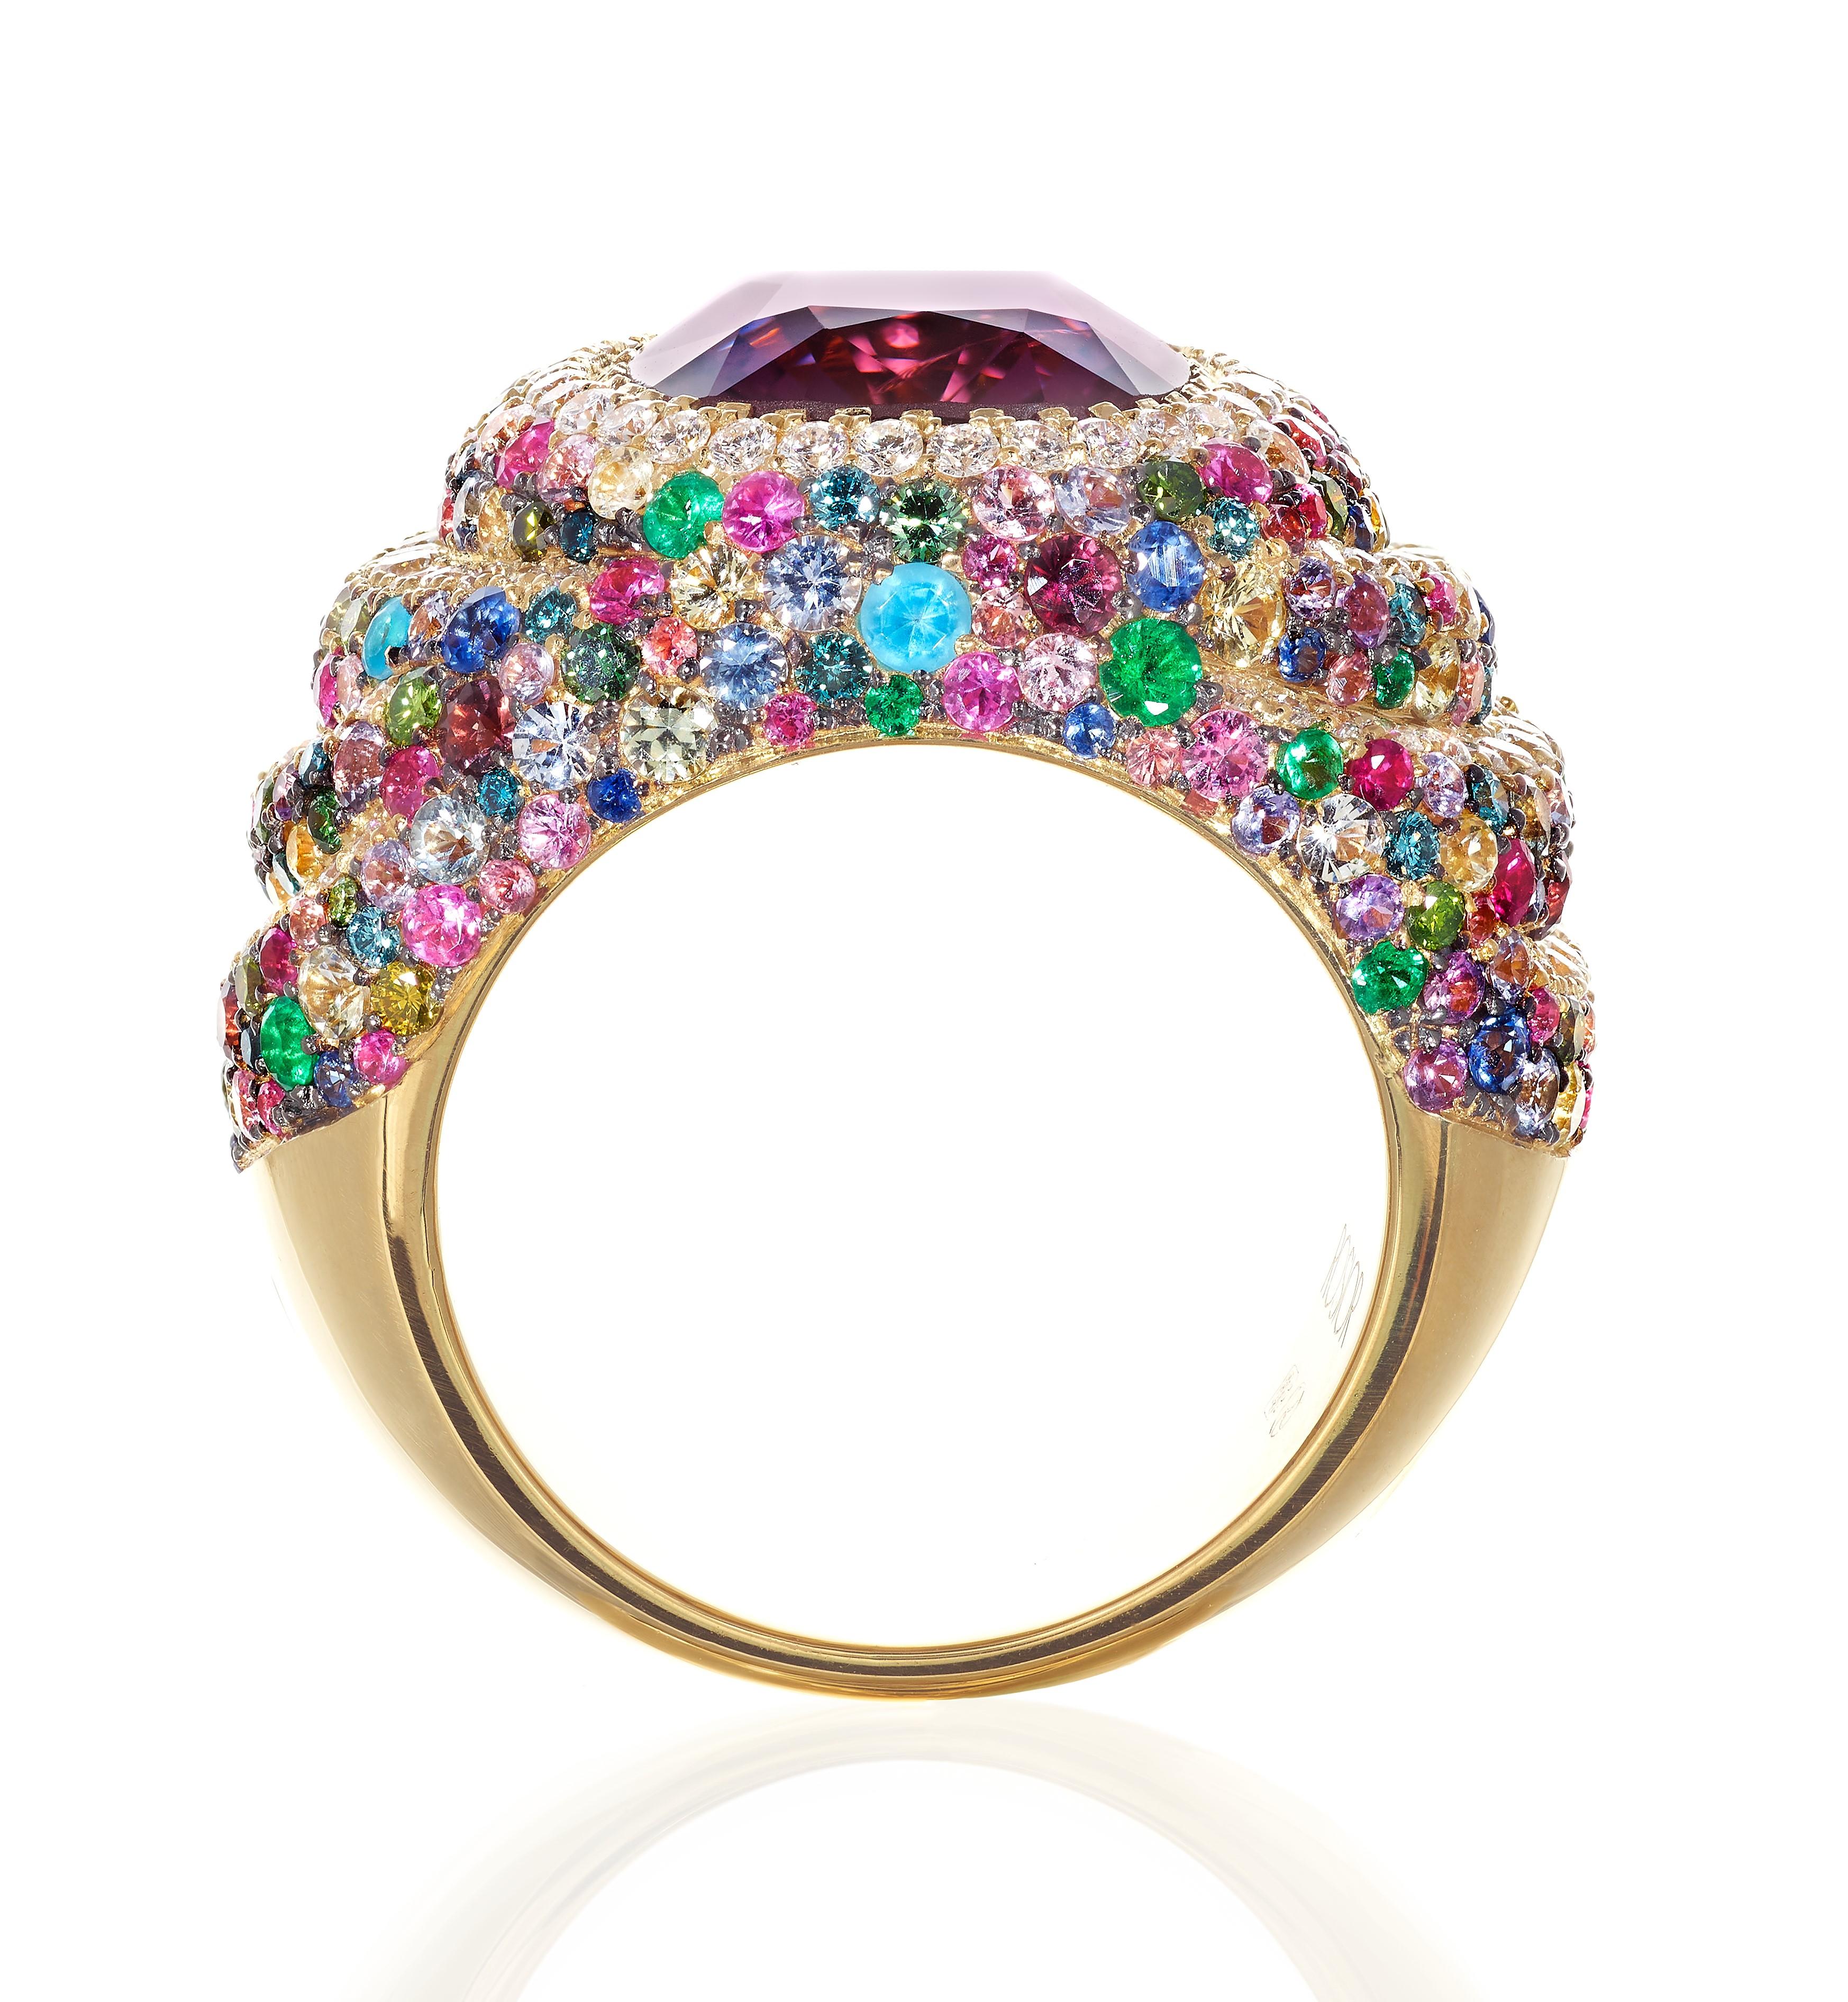 Rosior Cocktail Ring set in 19.2k yellow gold:
- 1 Antique Cushion Cut Spinel with 7,10 ct, certified by Lotus Gemmology (Ref. 1269-4043)
- 201 Blue, Pink, Brown and Purple Sapphires with 3,09 ct
- 100 F color, VVS clarity Diamonds with 0,80 ct;
-